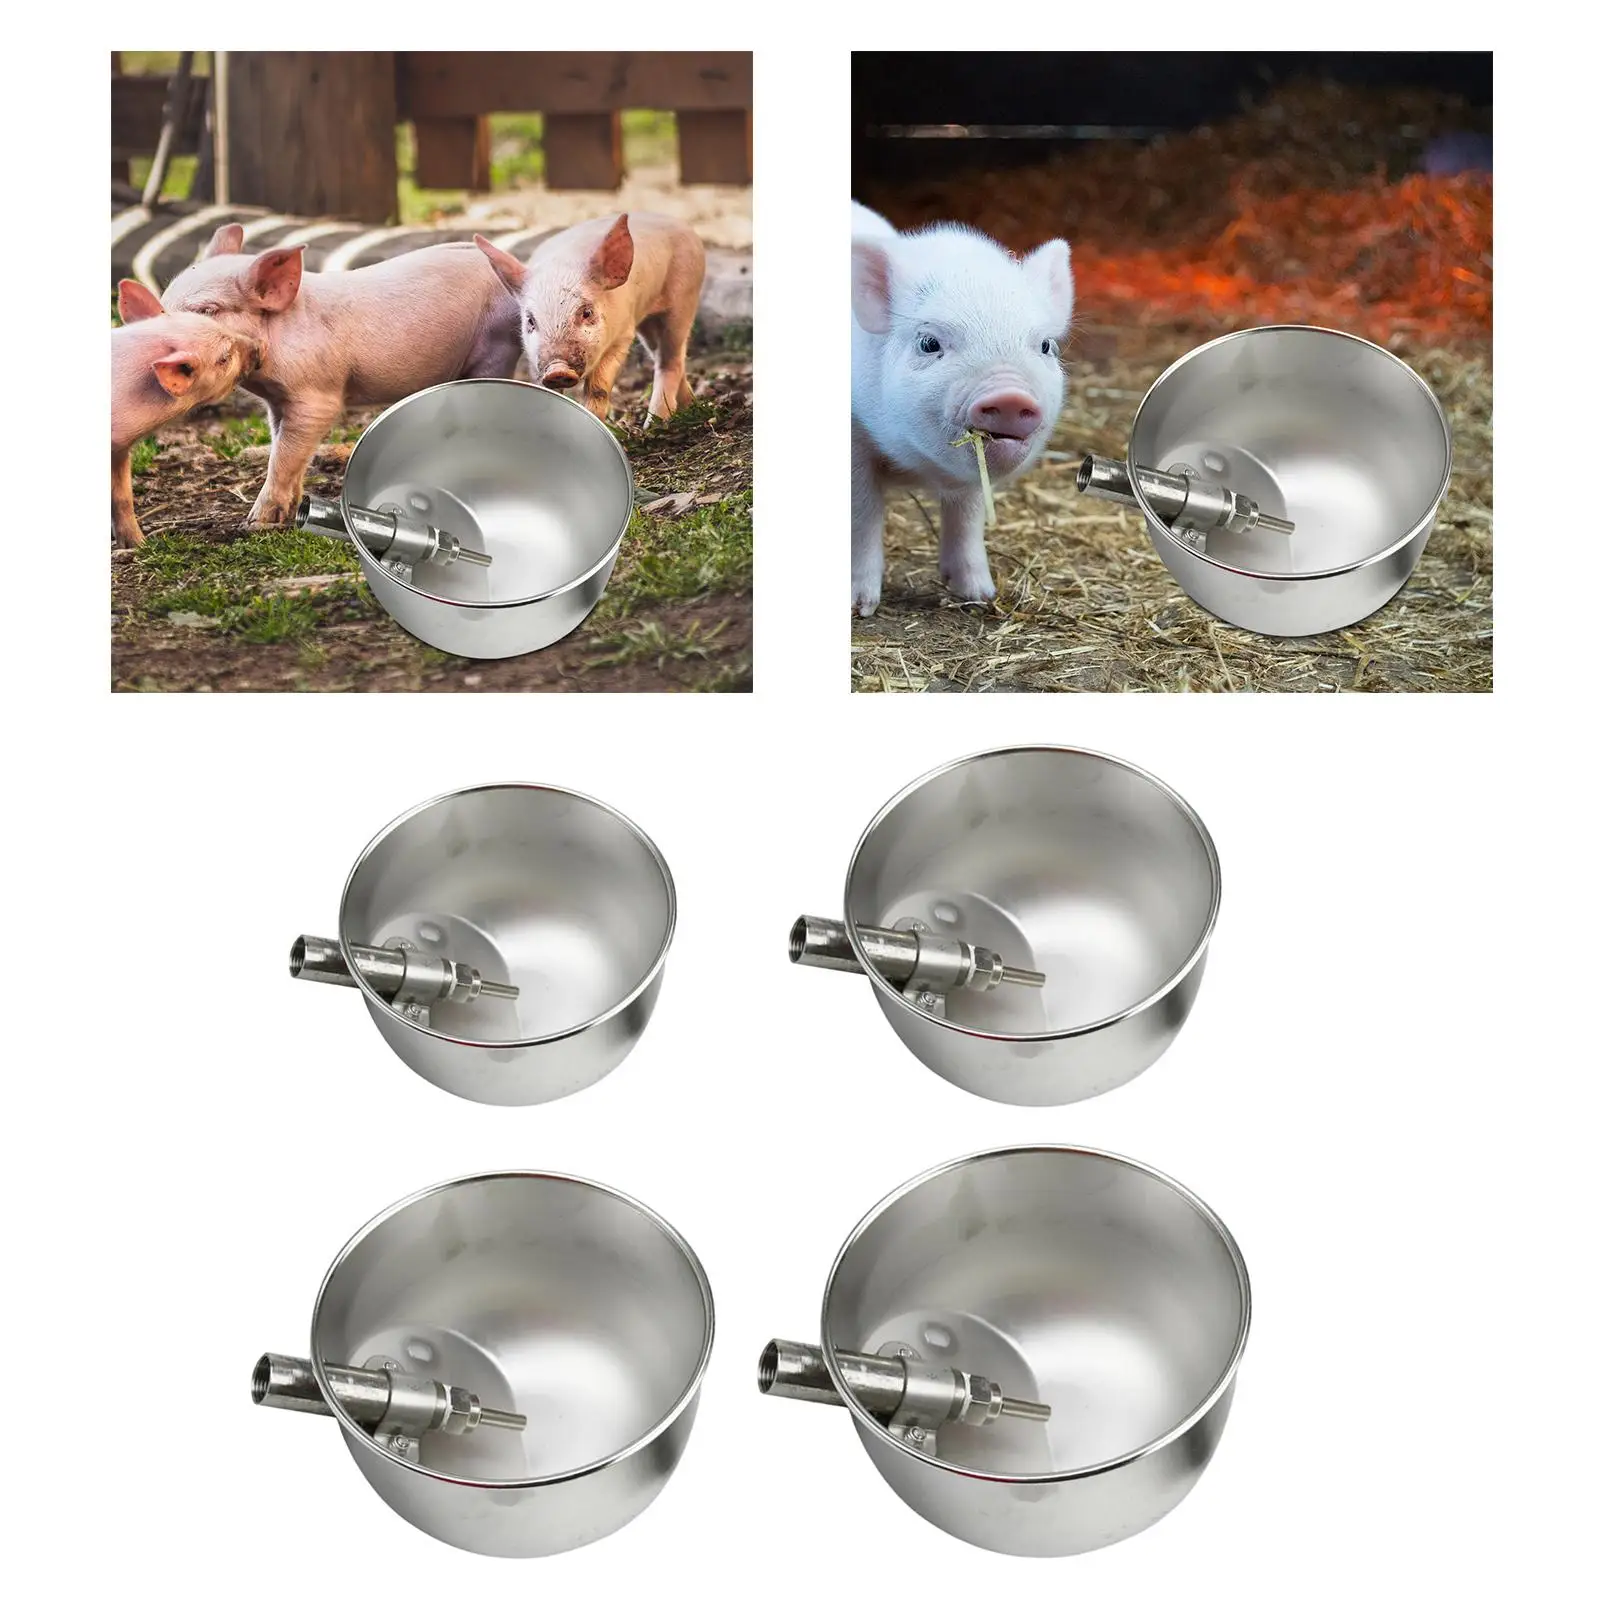 Automatic Pig Drinking Water Bowl Farm Animal Feeder Farm Animals Waterer Livestock Waterer Bowl Trough for Sheep Piglet Chicken